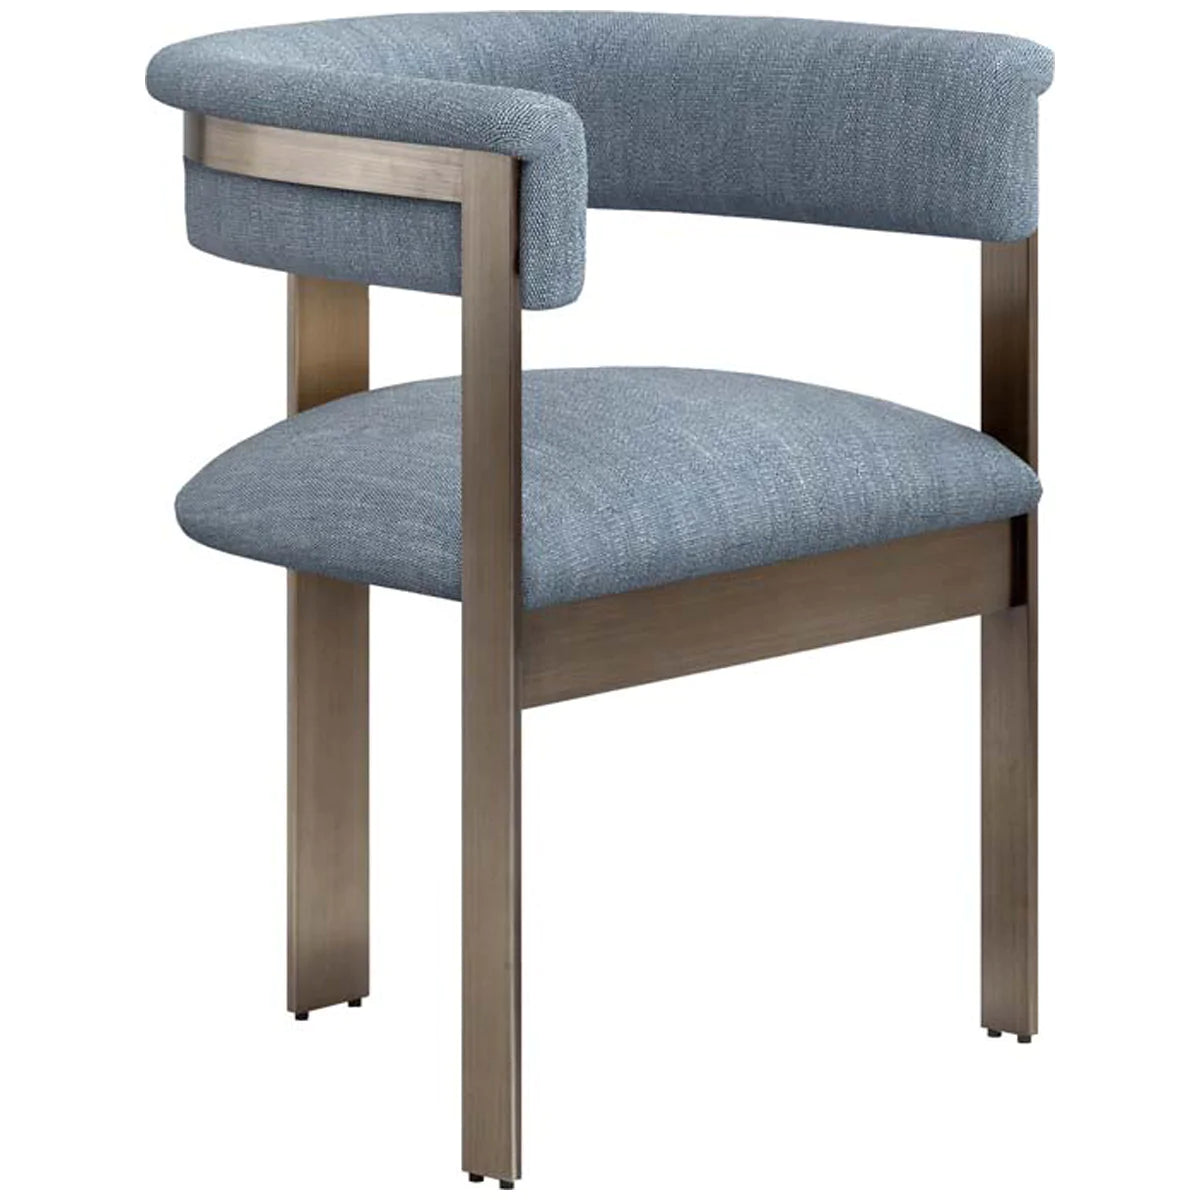 Interlude Home Darcy Dining Chair - Surf